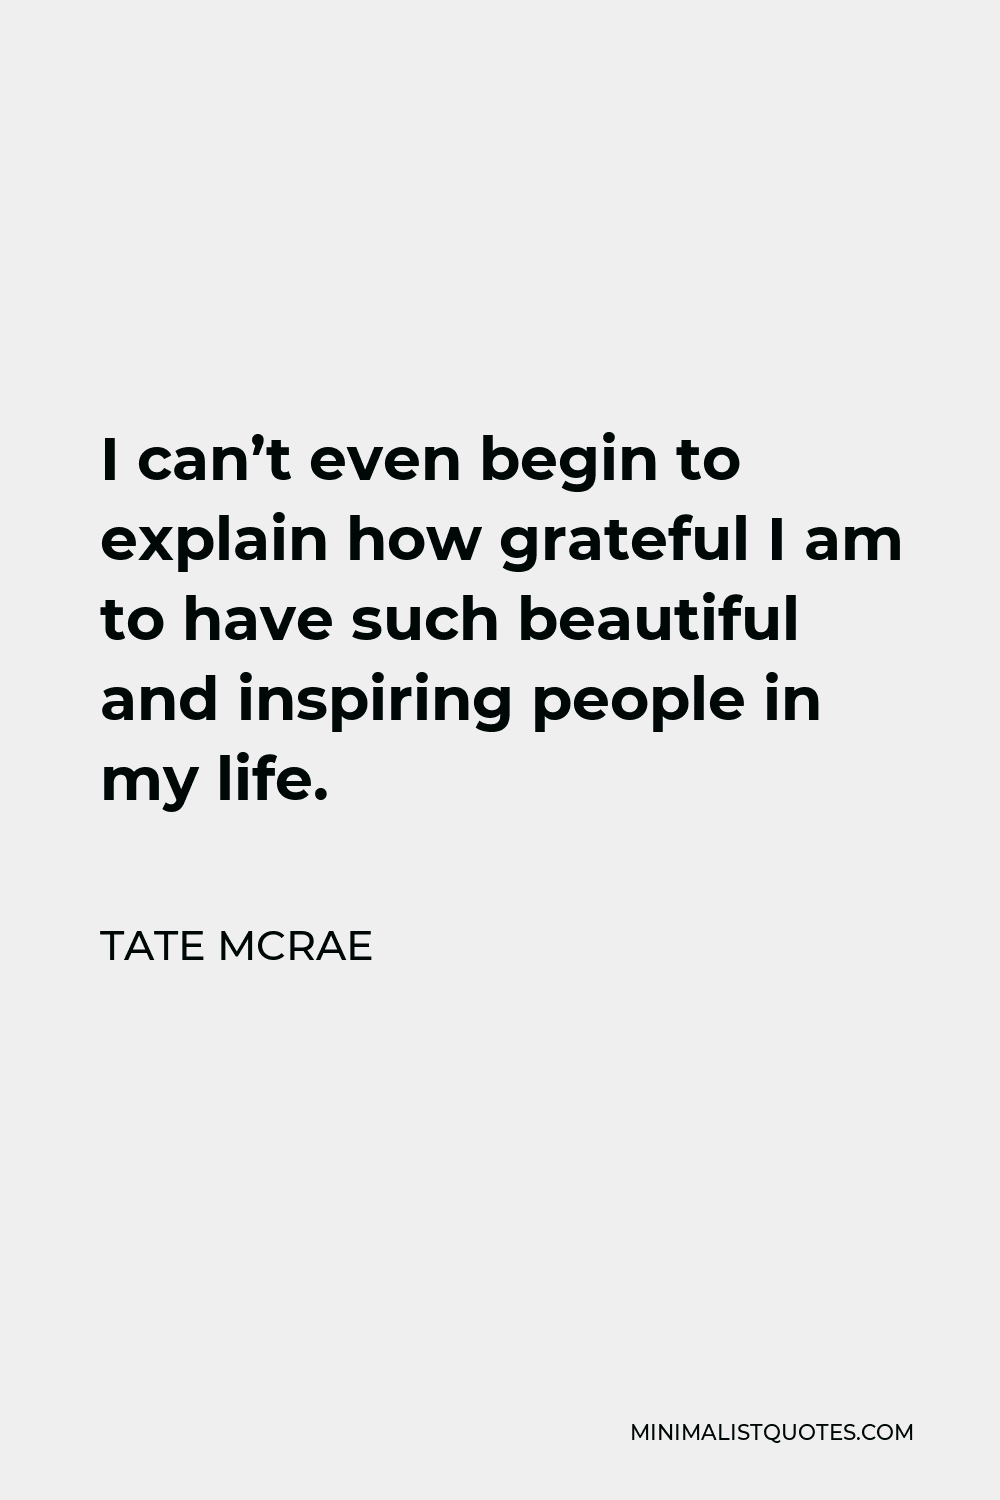 Tate McRae Quote - I can’t even begin to explain how grateful I am to have such beautiful and inspiring people in my life.